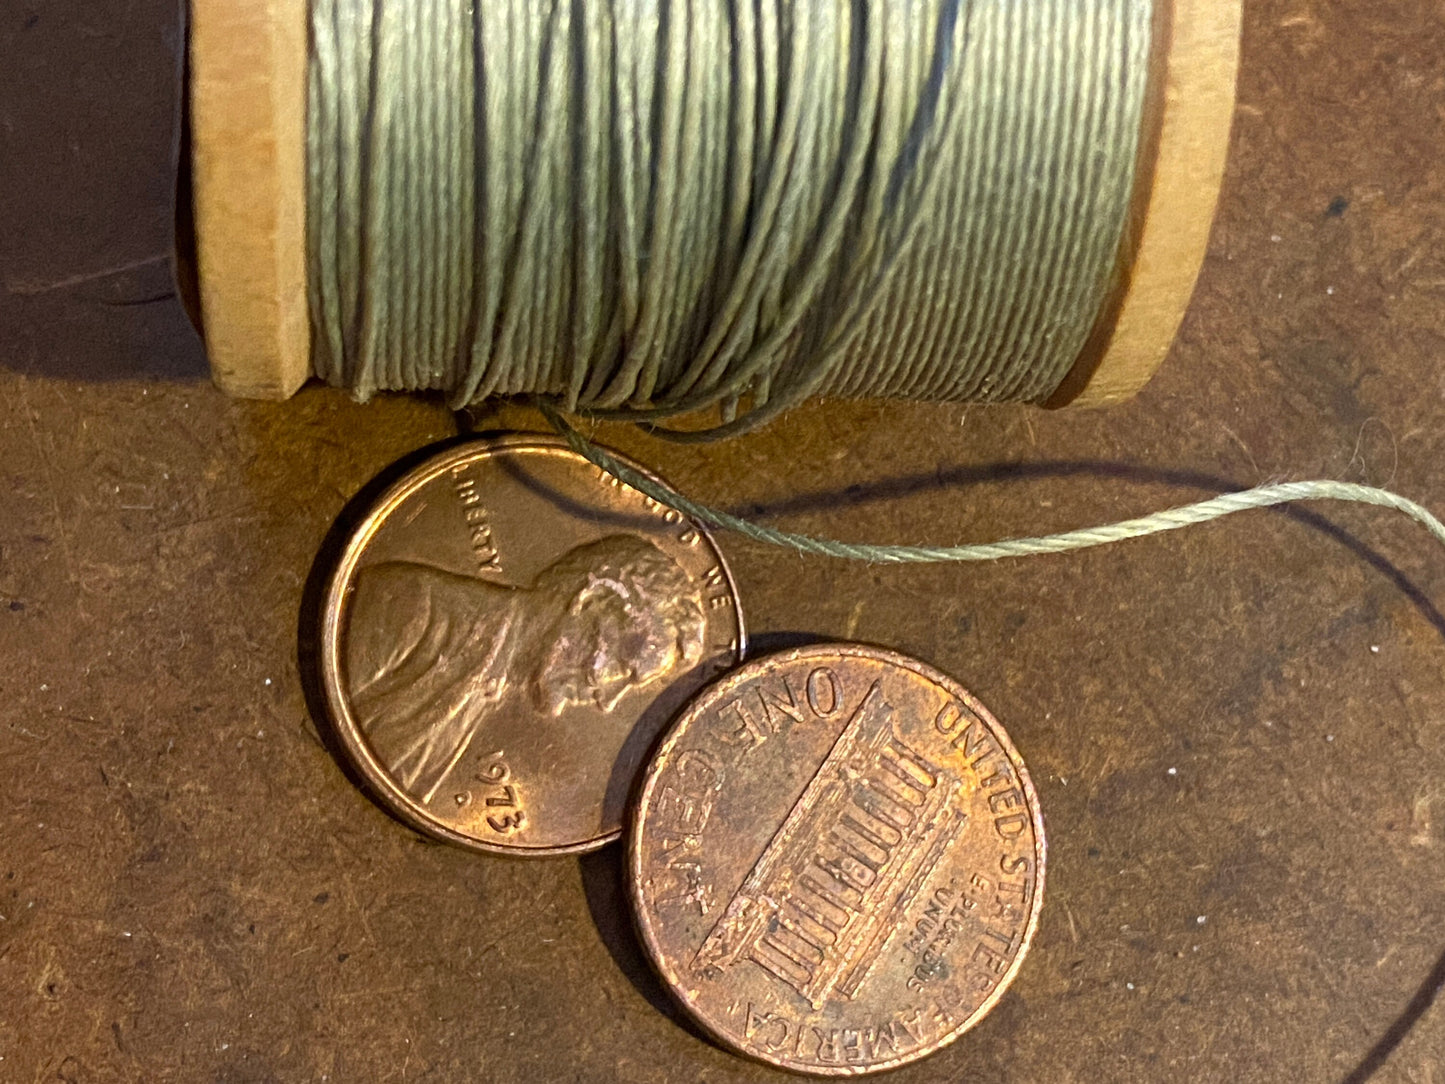 5 yards of heavy duty button and carpet utility thread / strong vintage cotton cord / repair, retie, reattach / durable sewing string